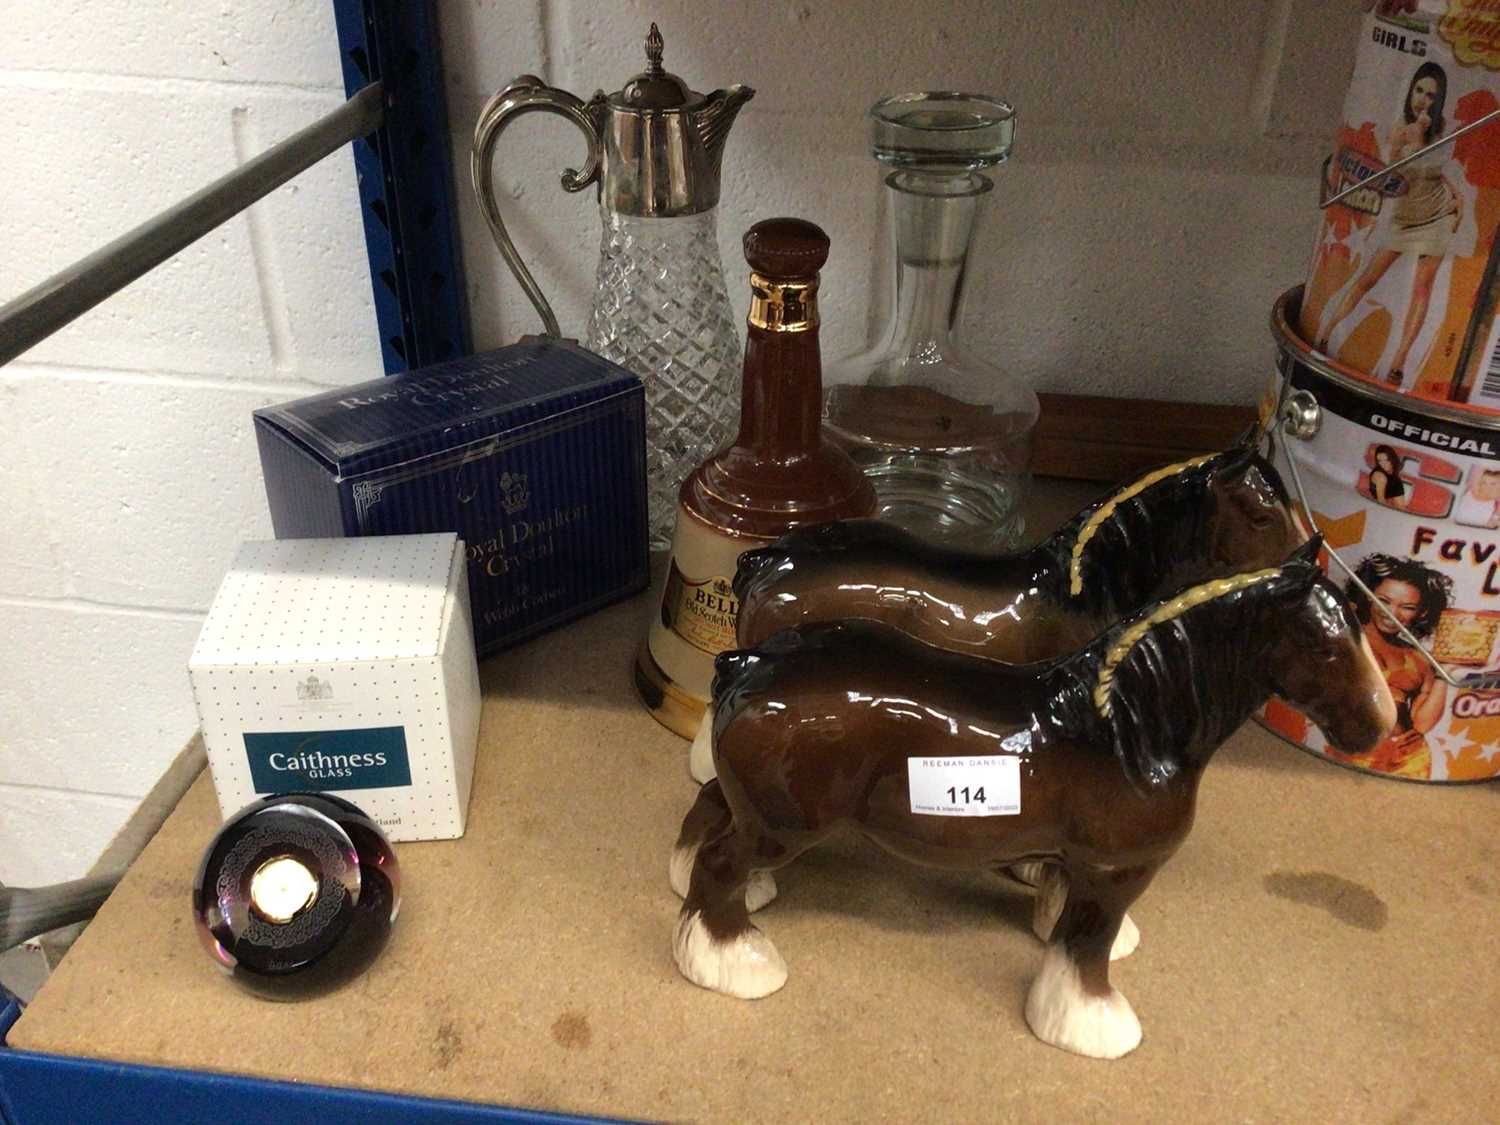 Lot 114 - Beswick and Royal Doulton horses, Caithness clock, silver plated claret jug, artists easel, etc